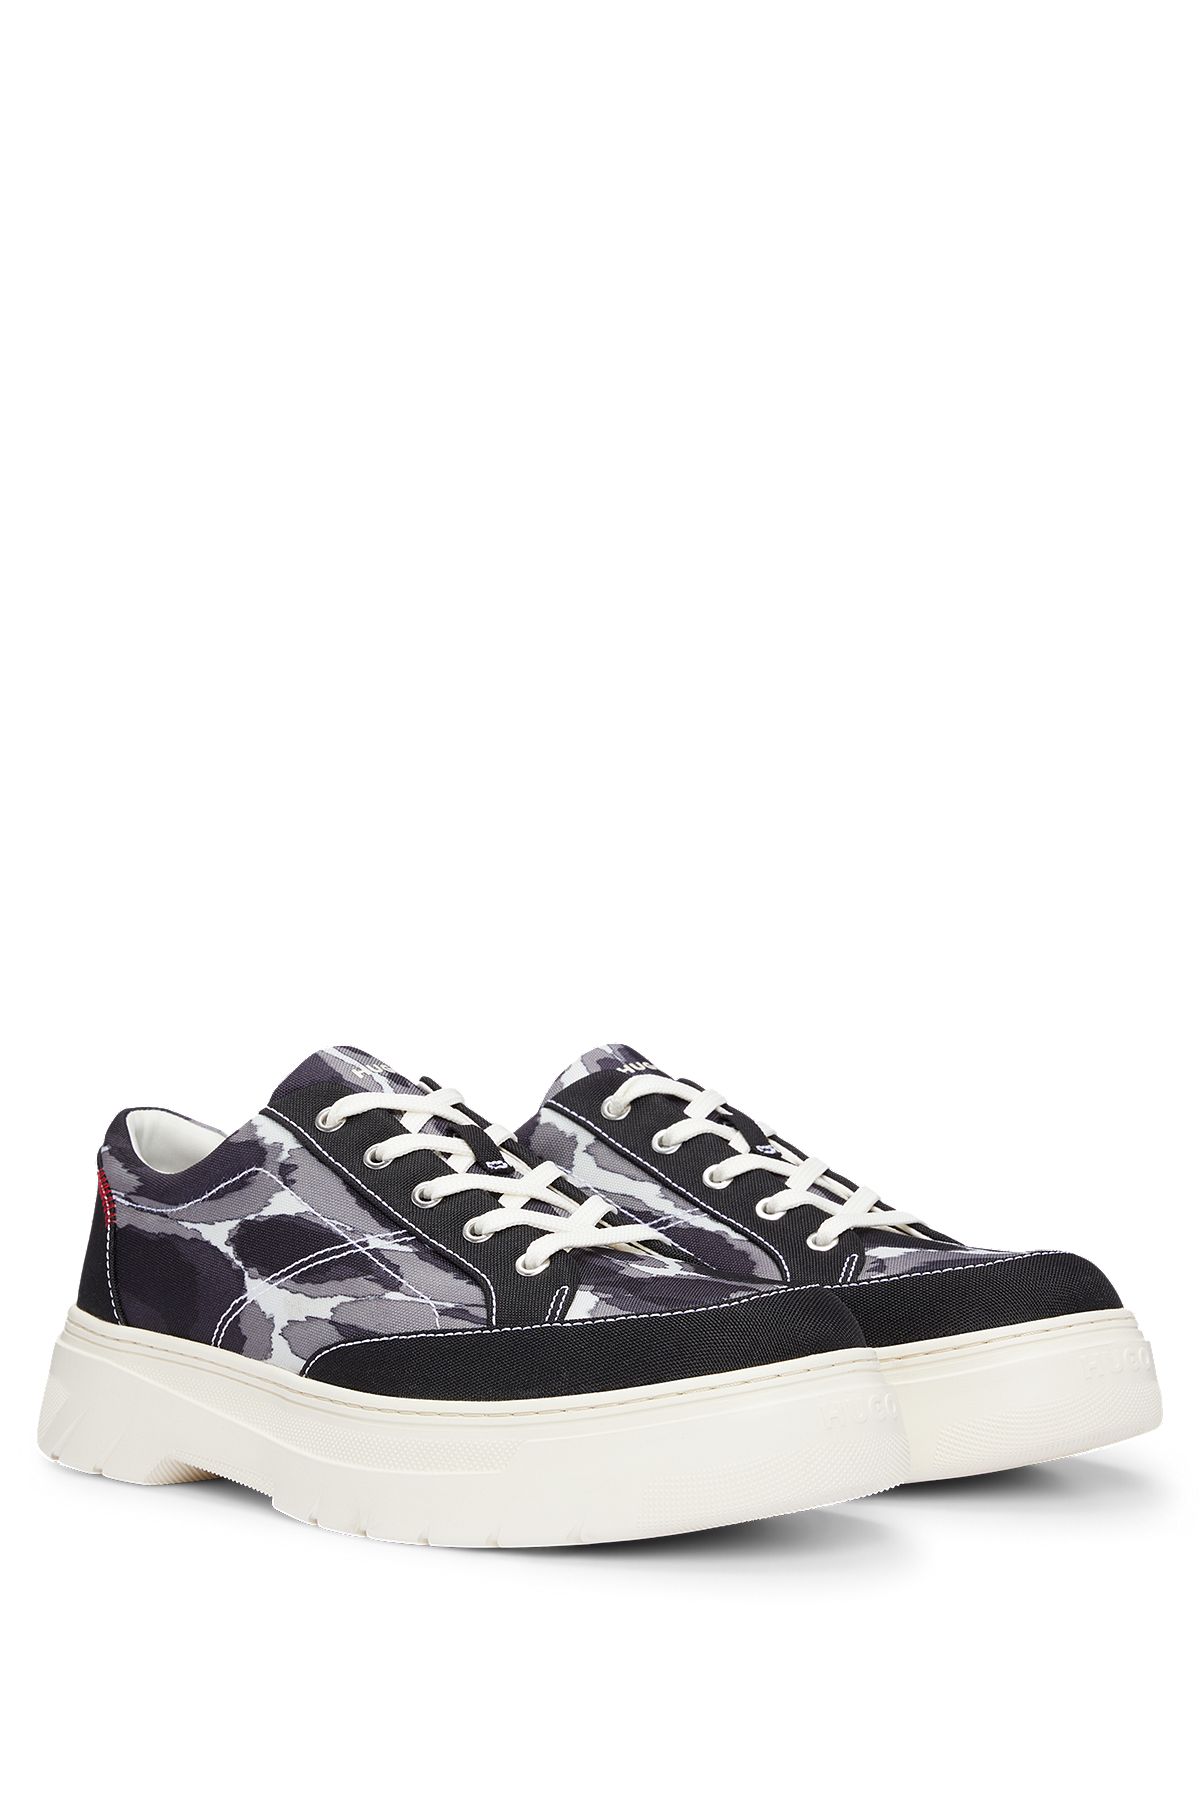 Casual Derby lace-up shoes with seasonal print, Patterned